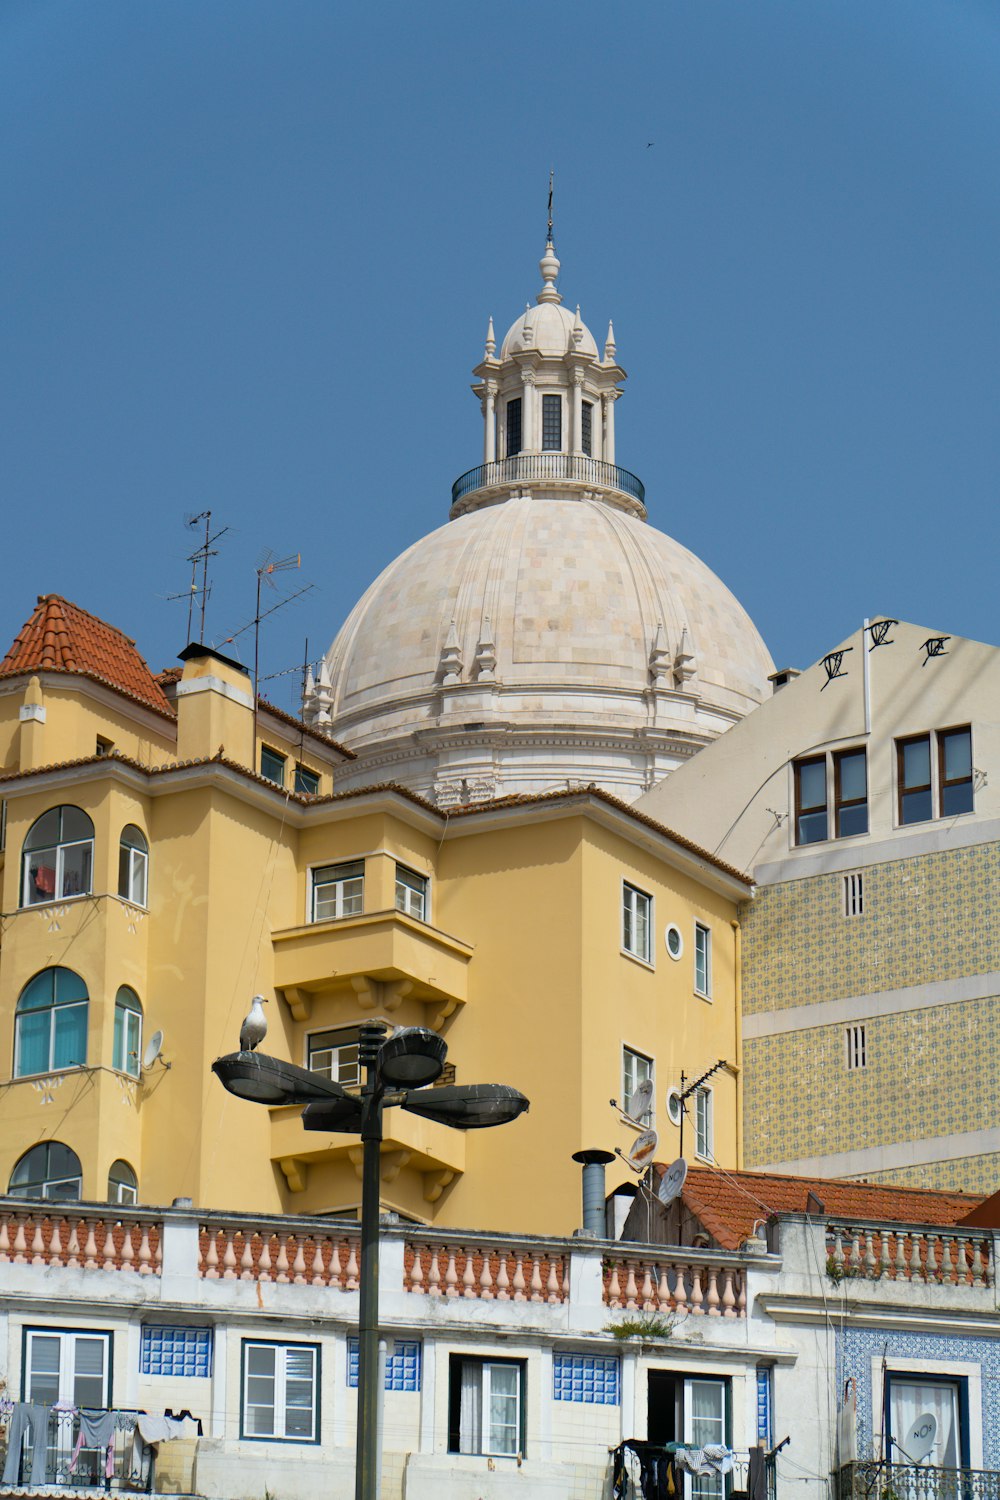 a large yellow building with a dome on top